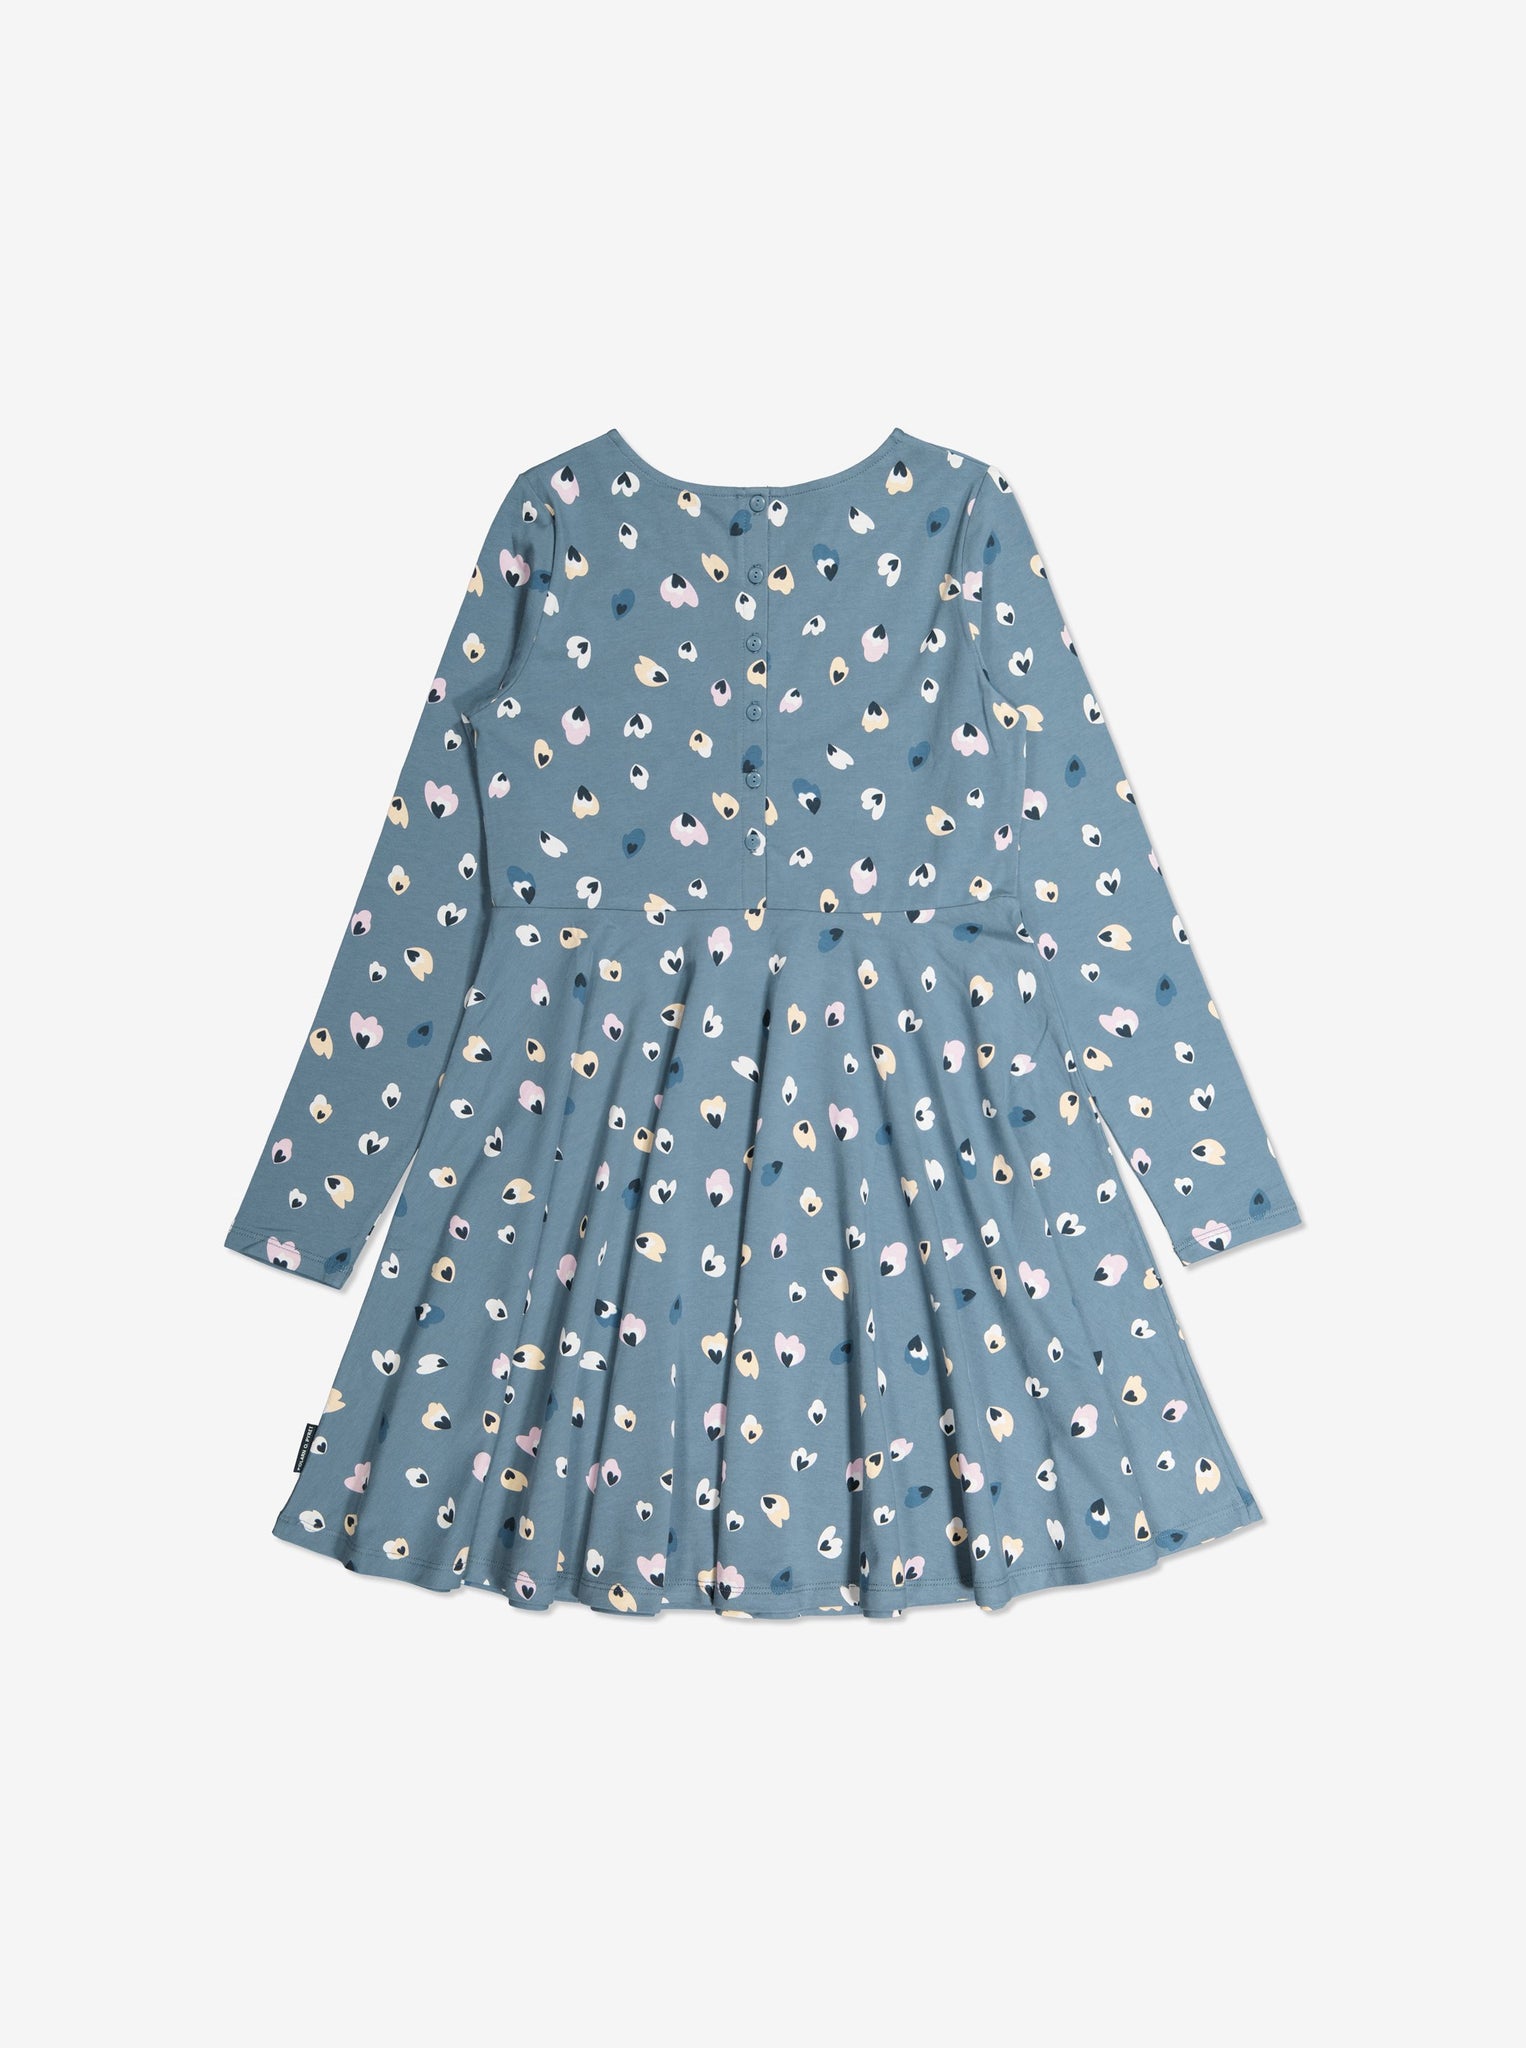   Blue Heart Print Girls Dress from Polarn O. Pyret Kidswear. Made with organic cotton for comfortable fit.